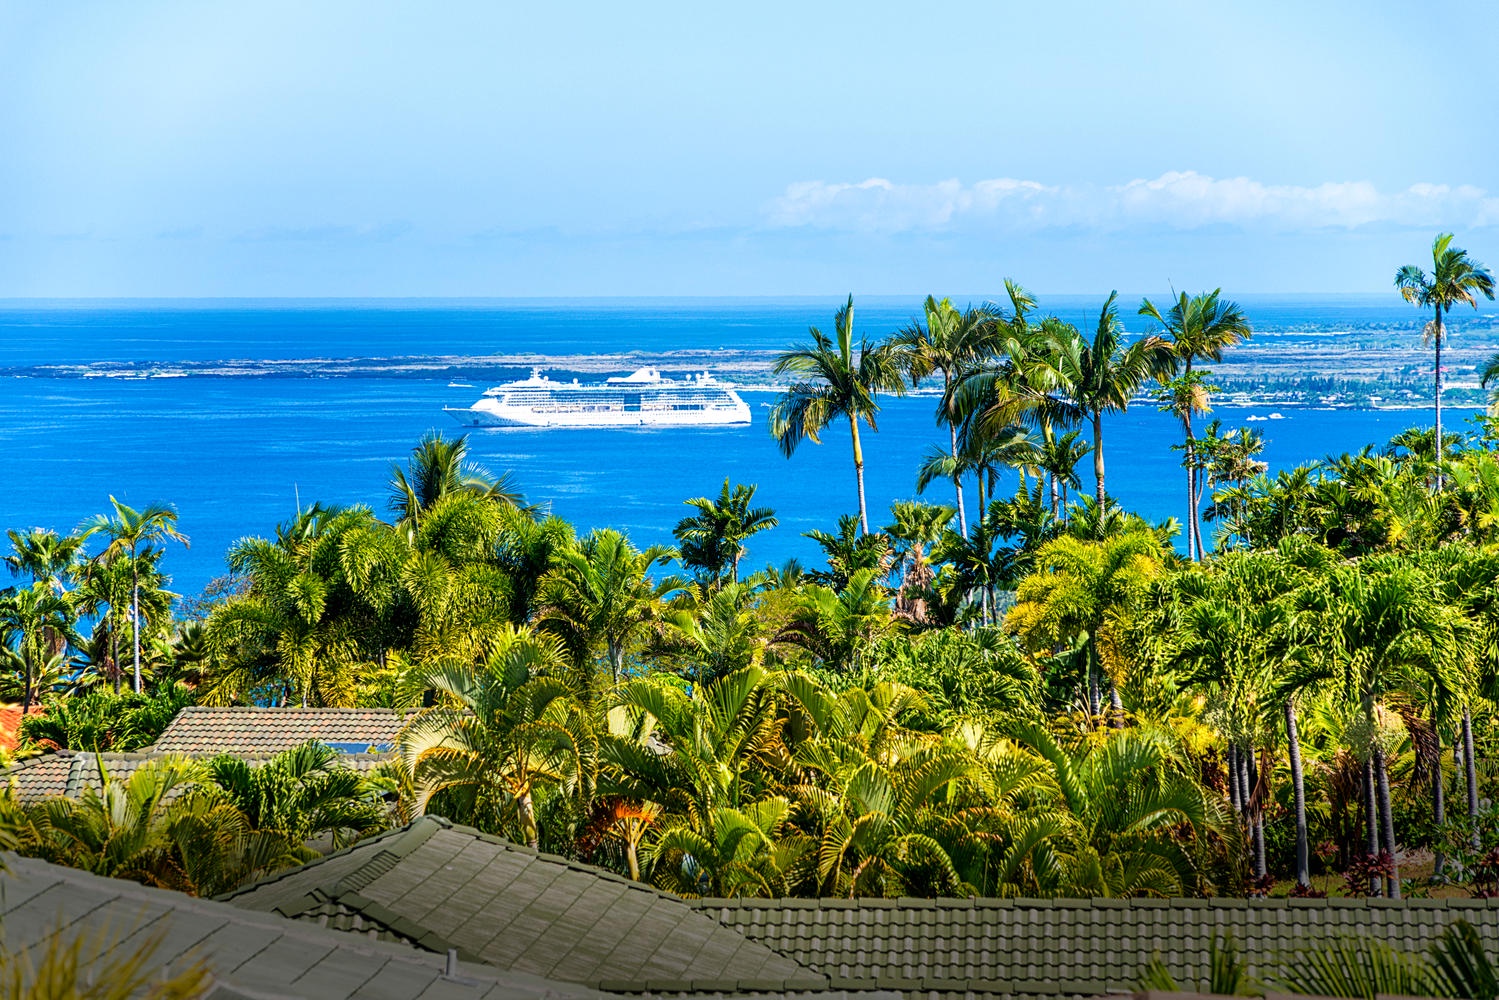 Kailua Kona Vacation Rentals, Blue Hawaii - Live the Hawaiian Dream with Our Beautifully Appointed and Relaxing Vacation Rental.